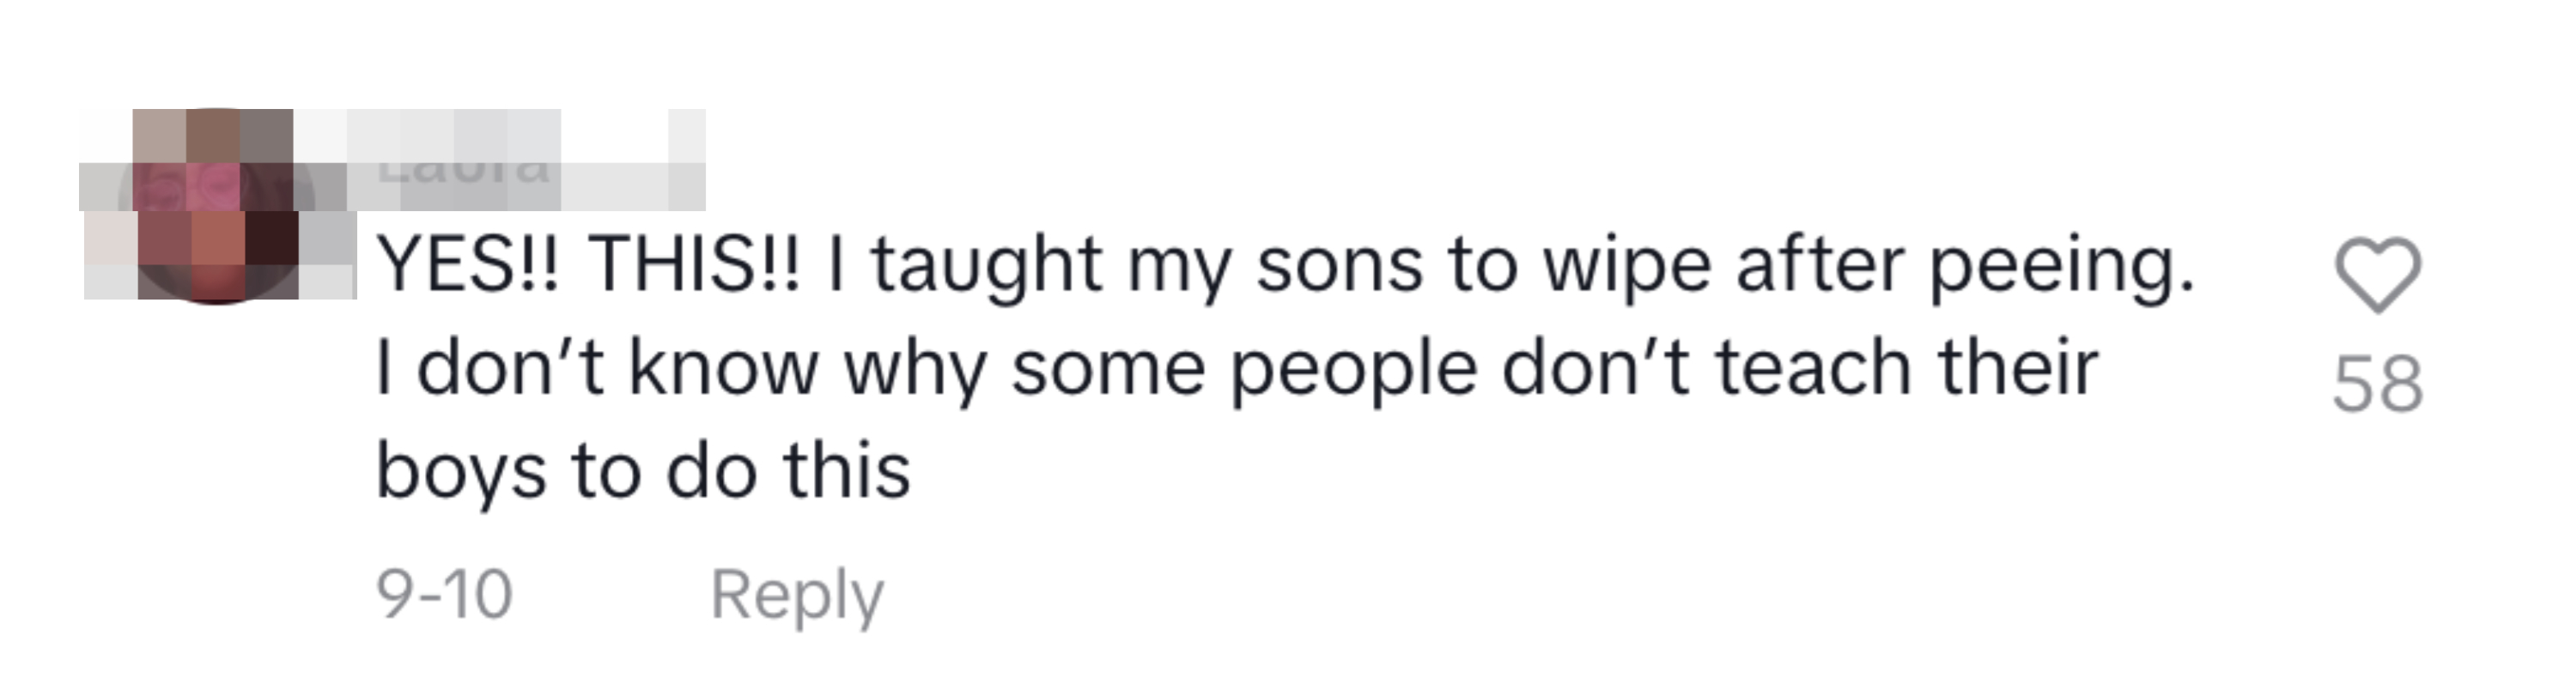 &quot;I taught my sons to wipe after peeing&quot;